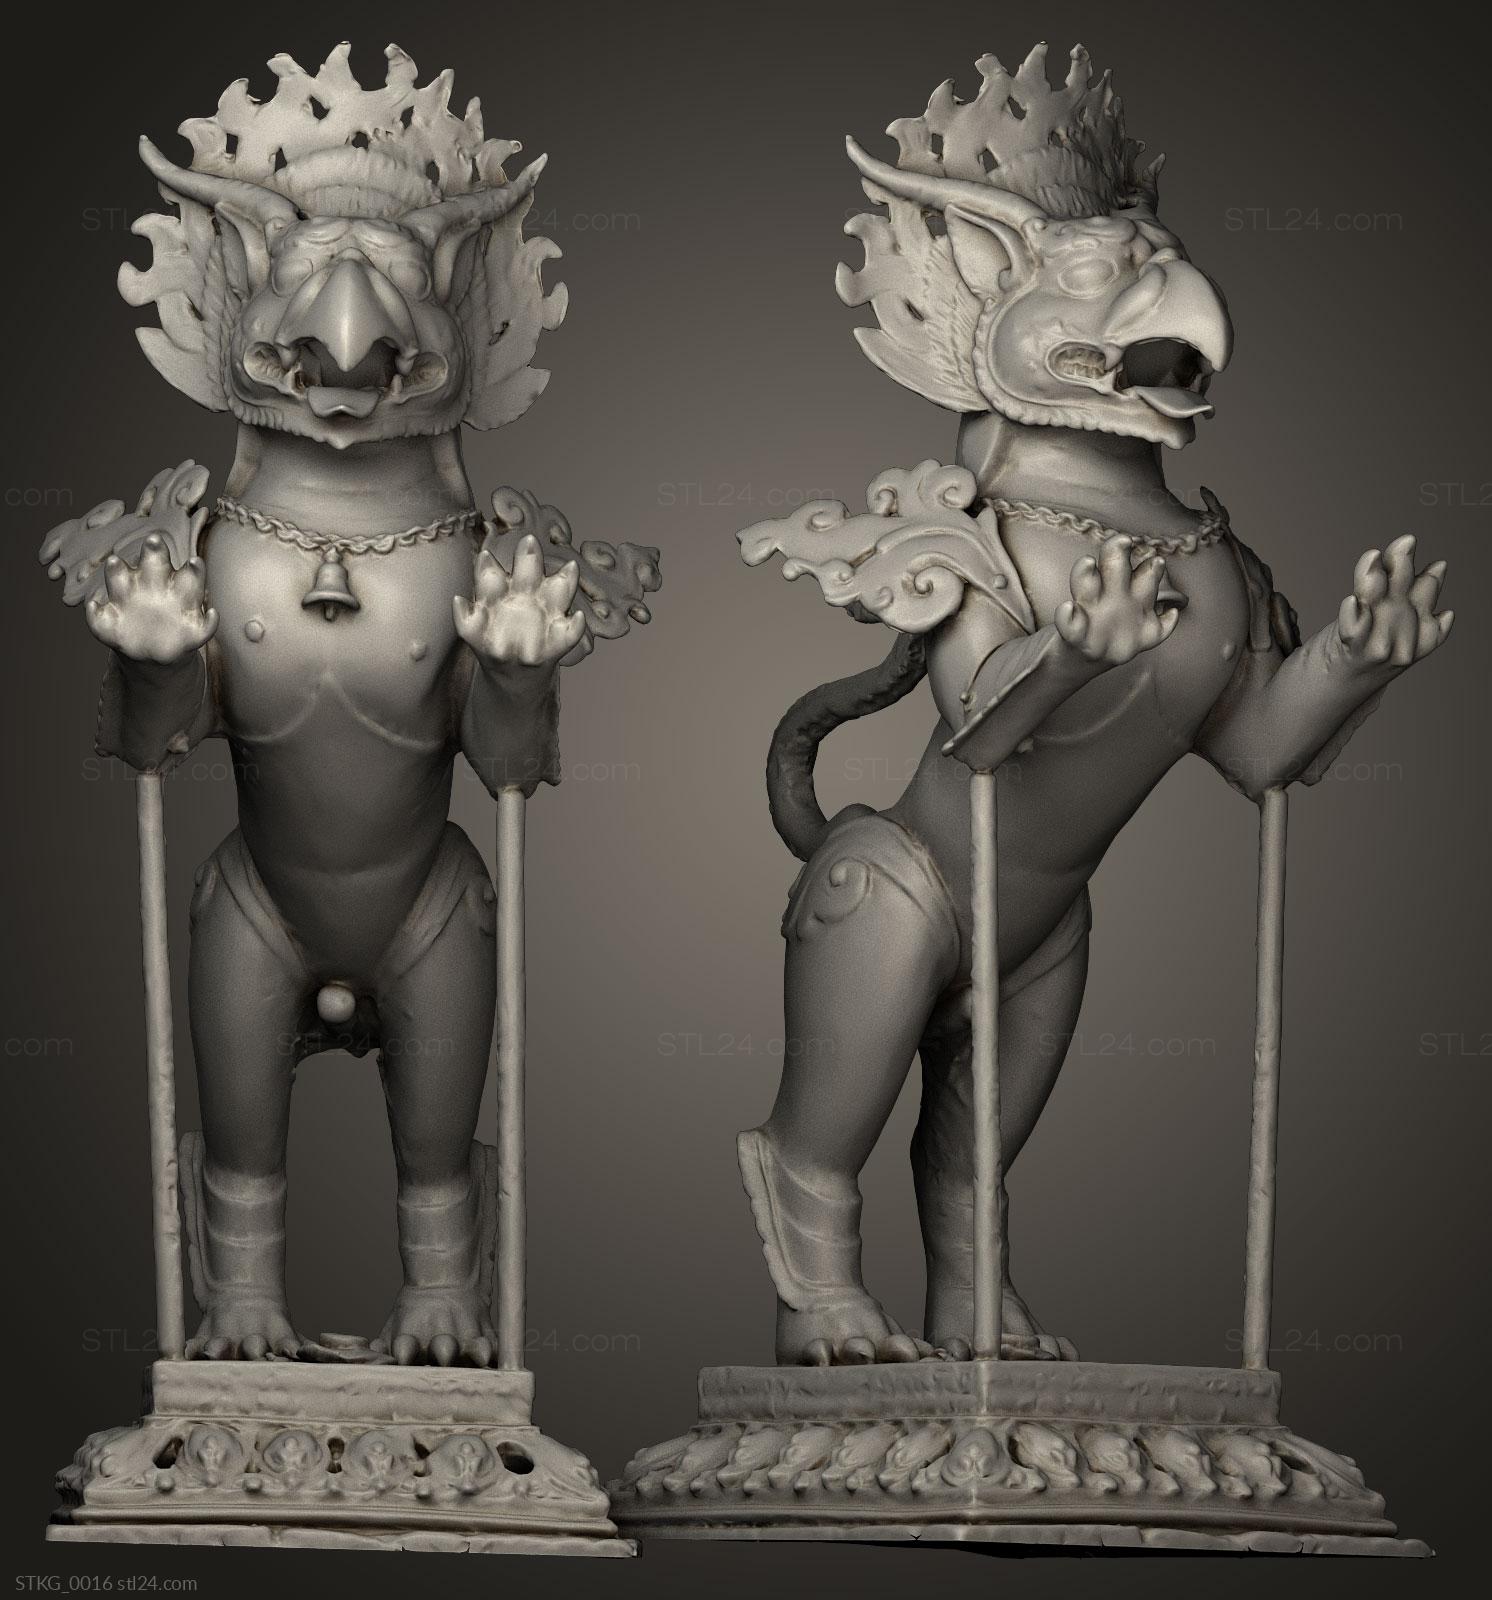 Figurines of griffins and dragons